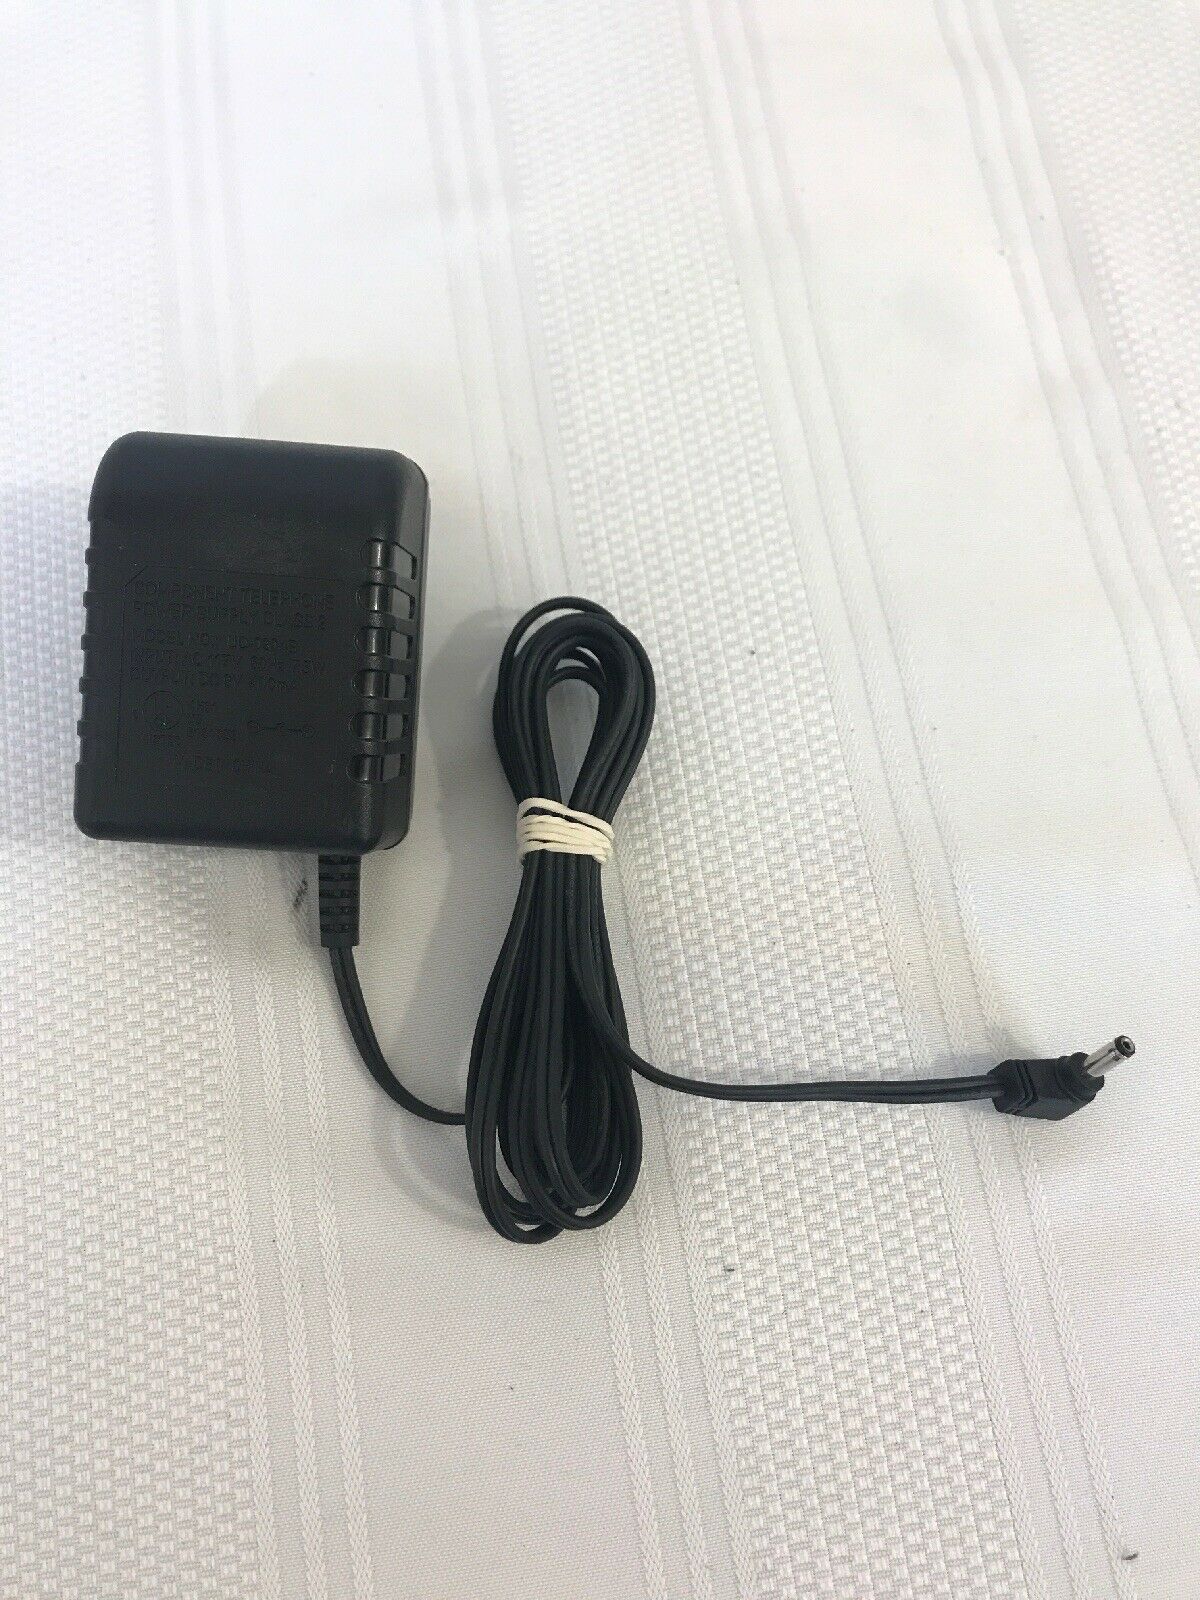 NEW Component Telephone UD-0904B AC Adapter Power Supply Class 2 DC 9V 400mA